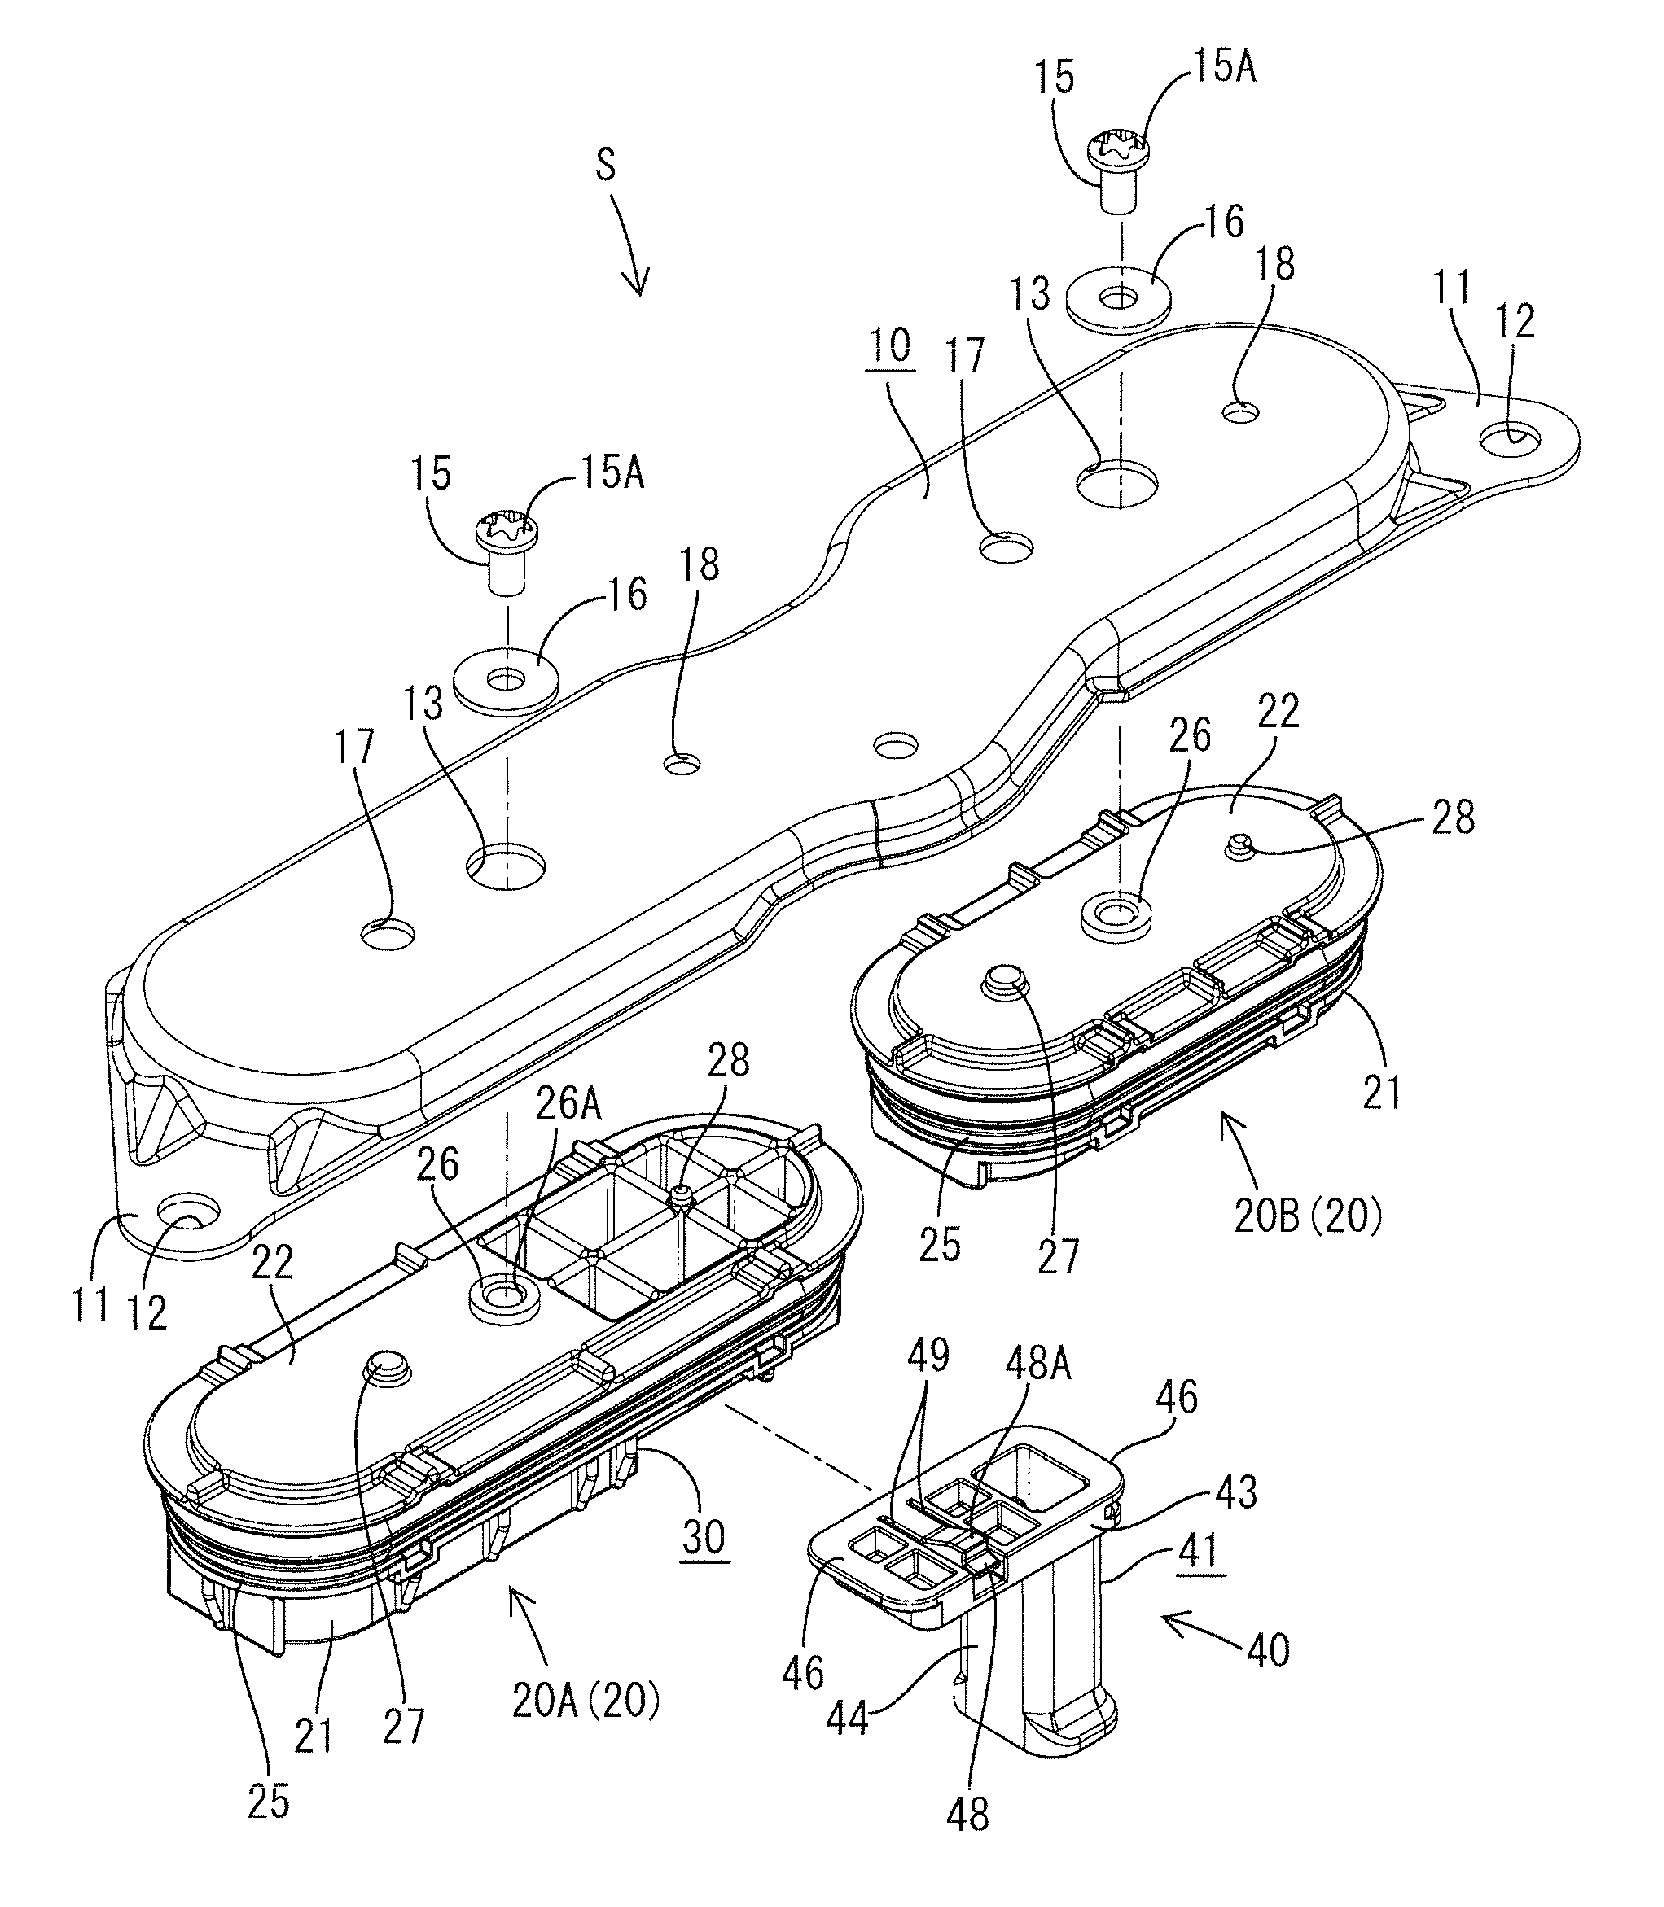 Seal cover for in-vehicle electric device